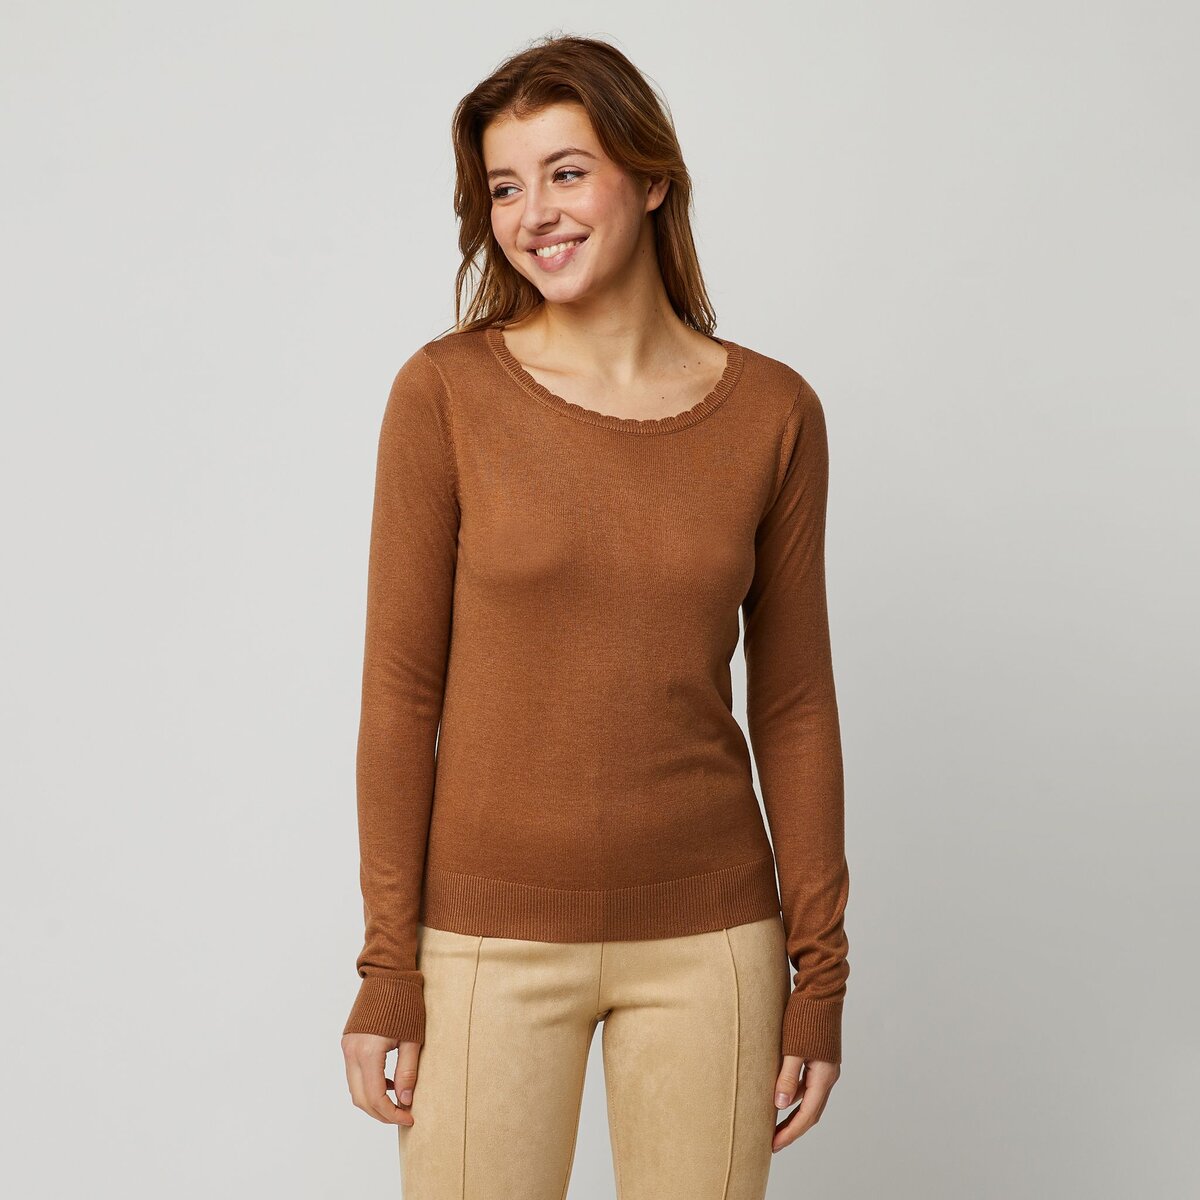 INEXTENSO Pull beige camel femme pas cher 